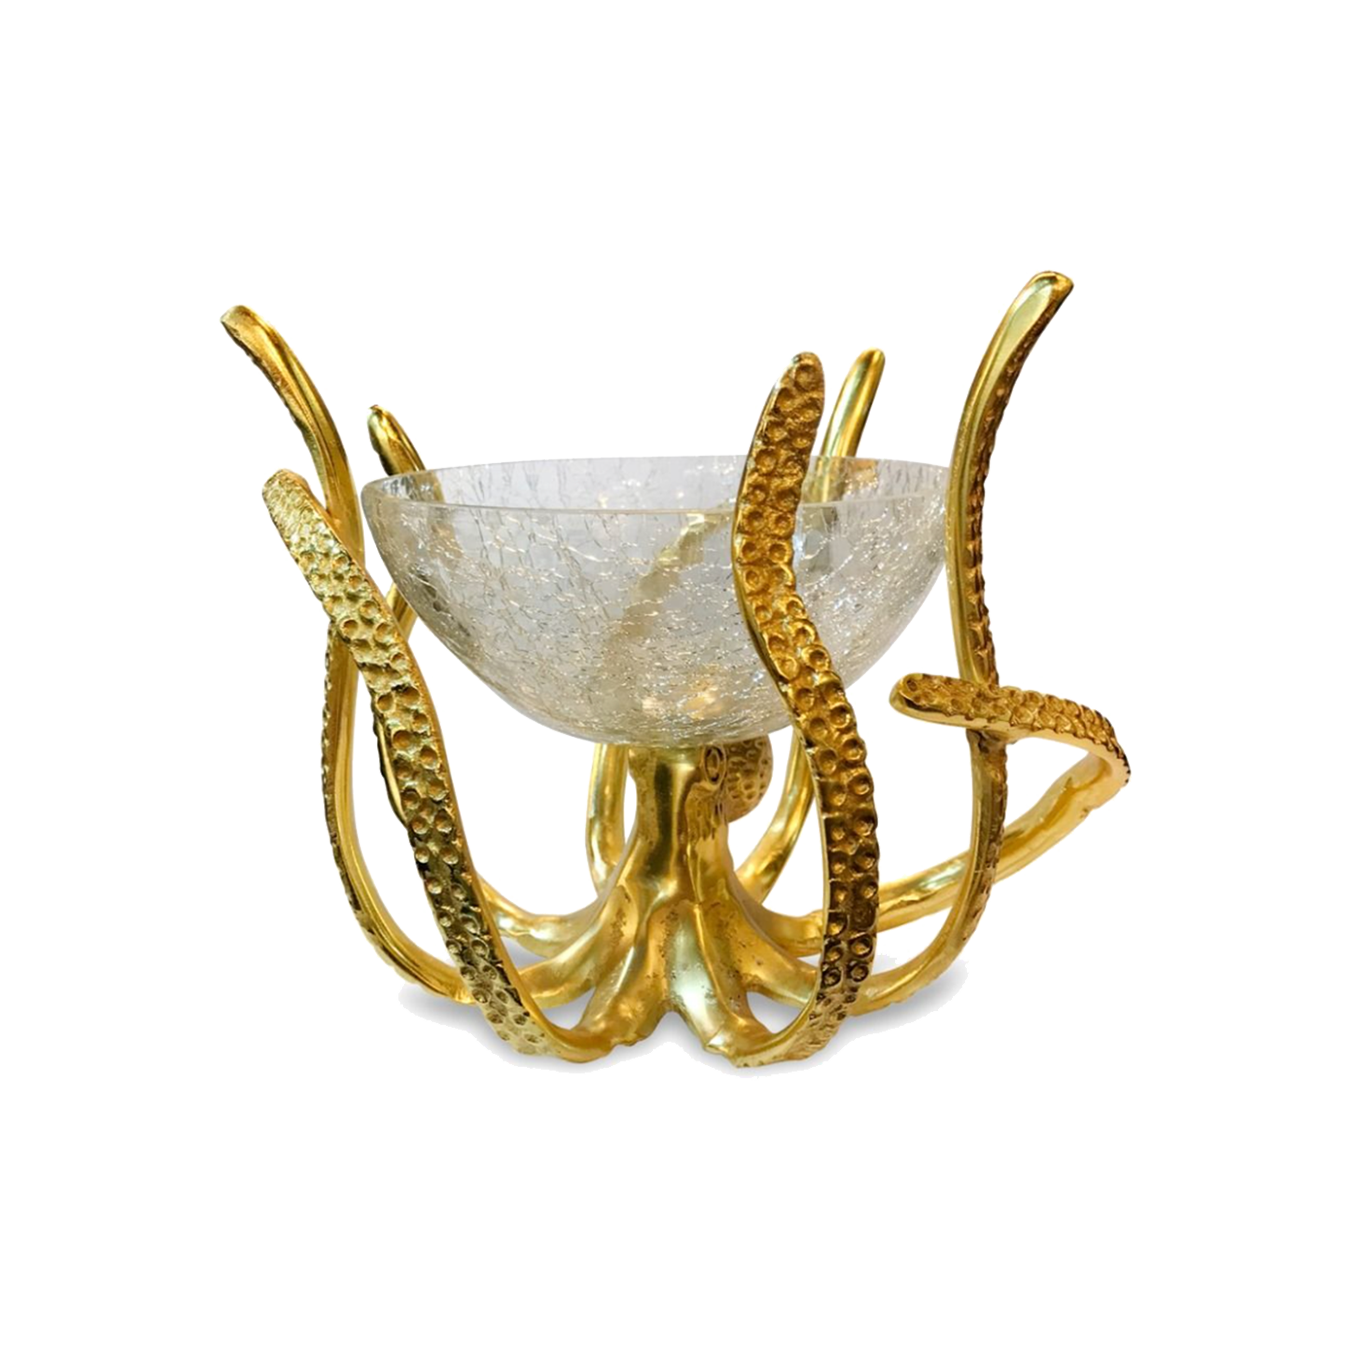 Gold Mini Octopus Stand & Crackle Glass Bowl